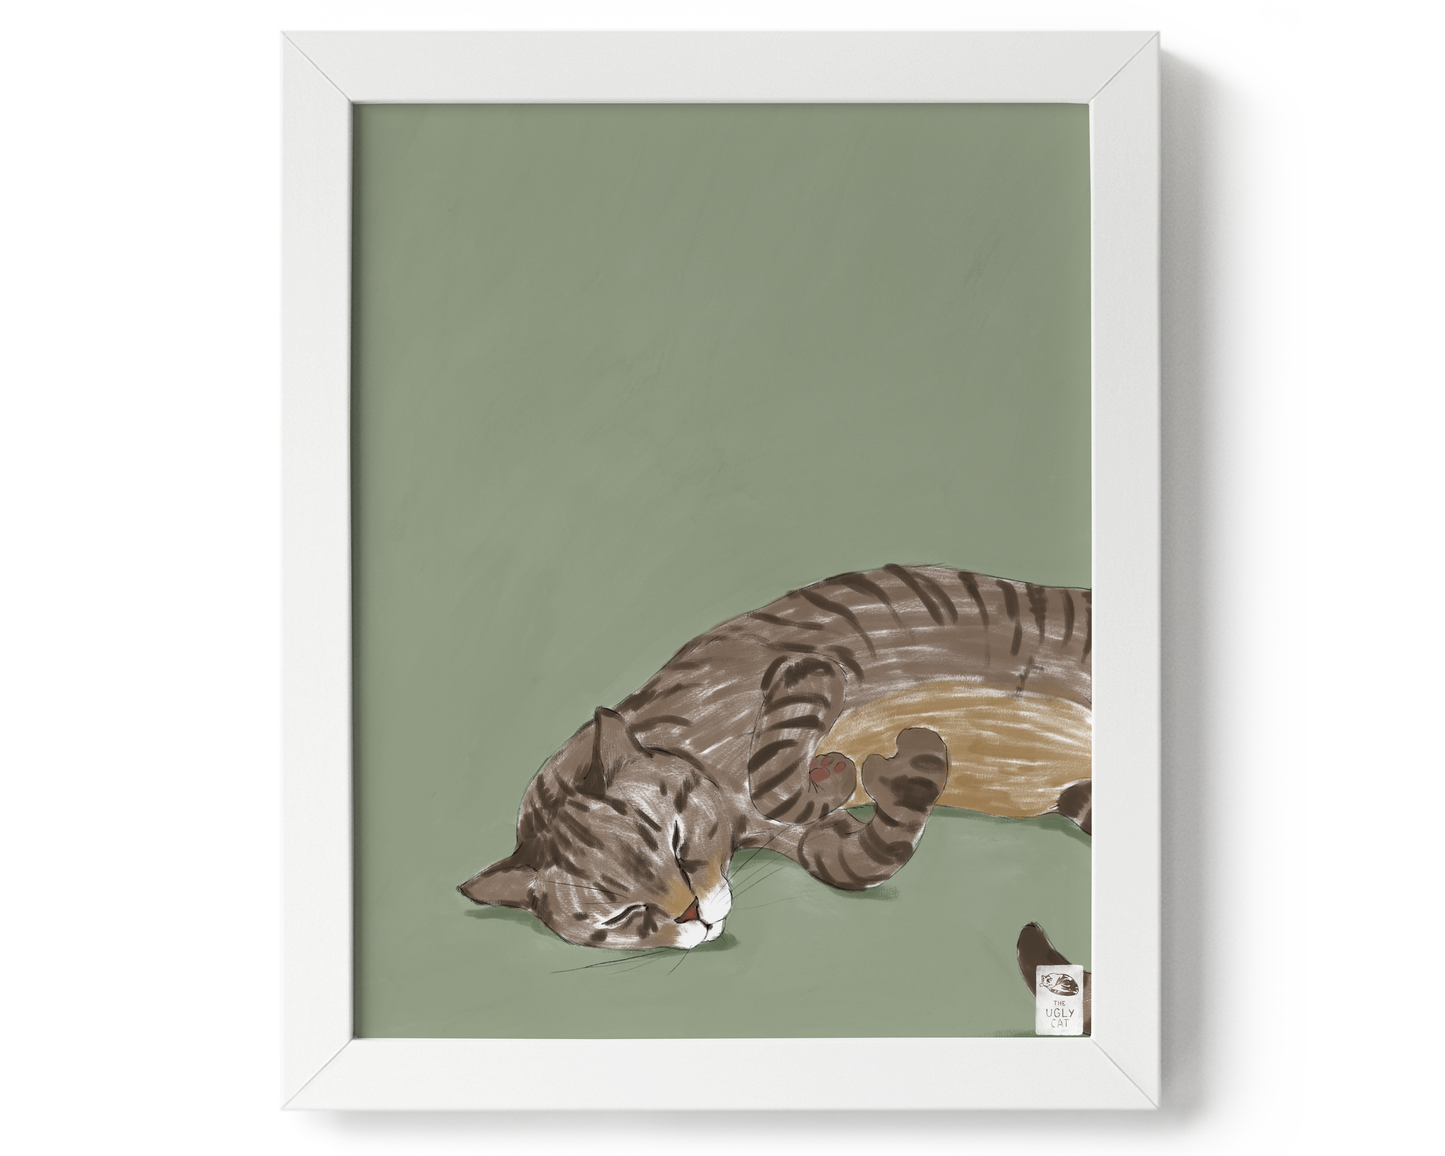 "Isengrin" by Catherine Hébert - Striped Brown Tabby Cat Giclee Art Print - 8"x10" size